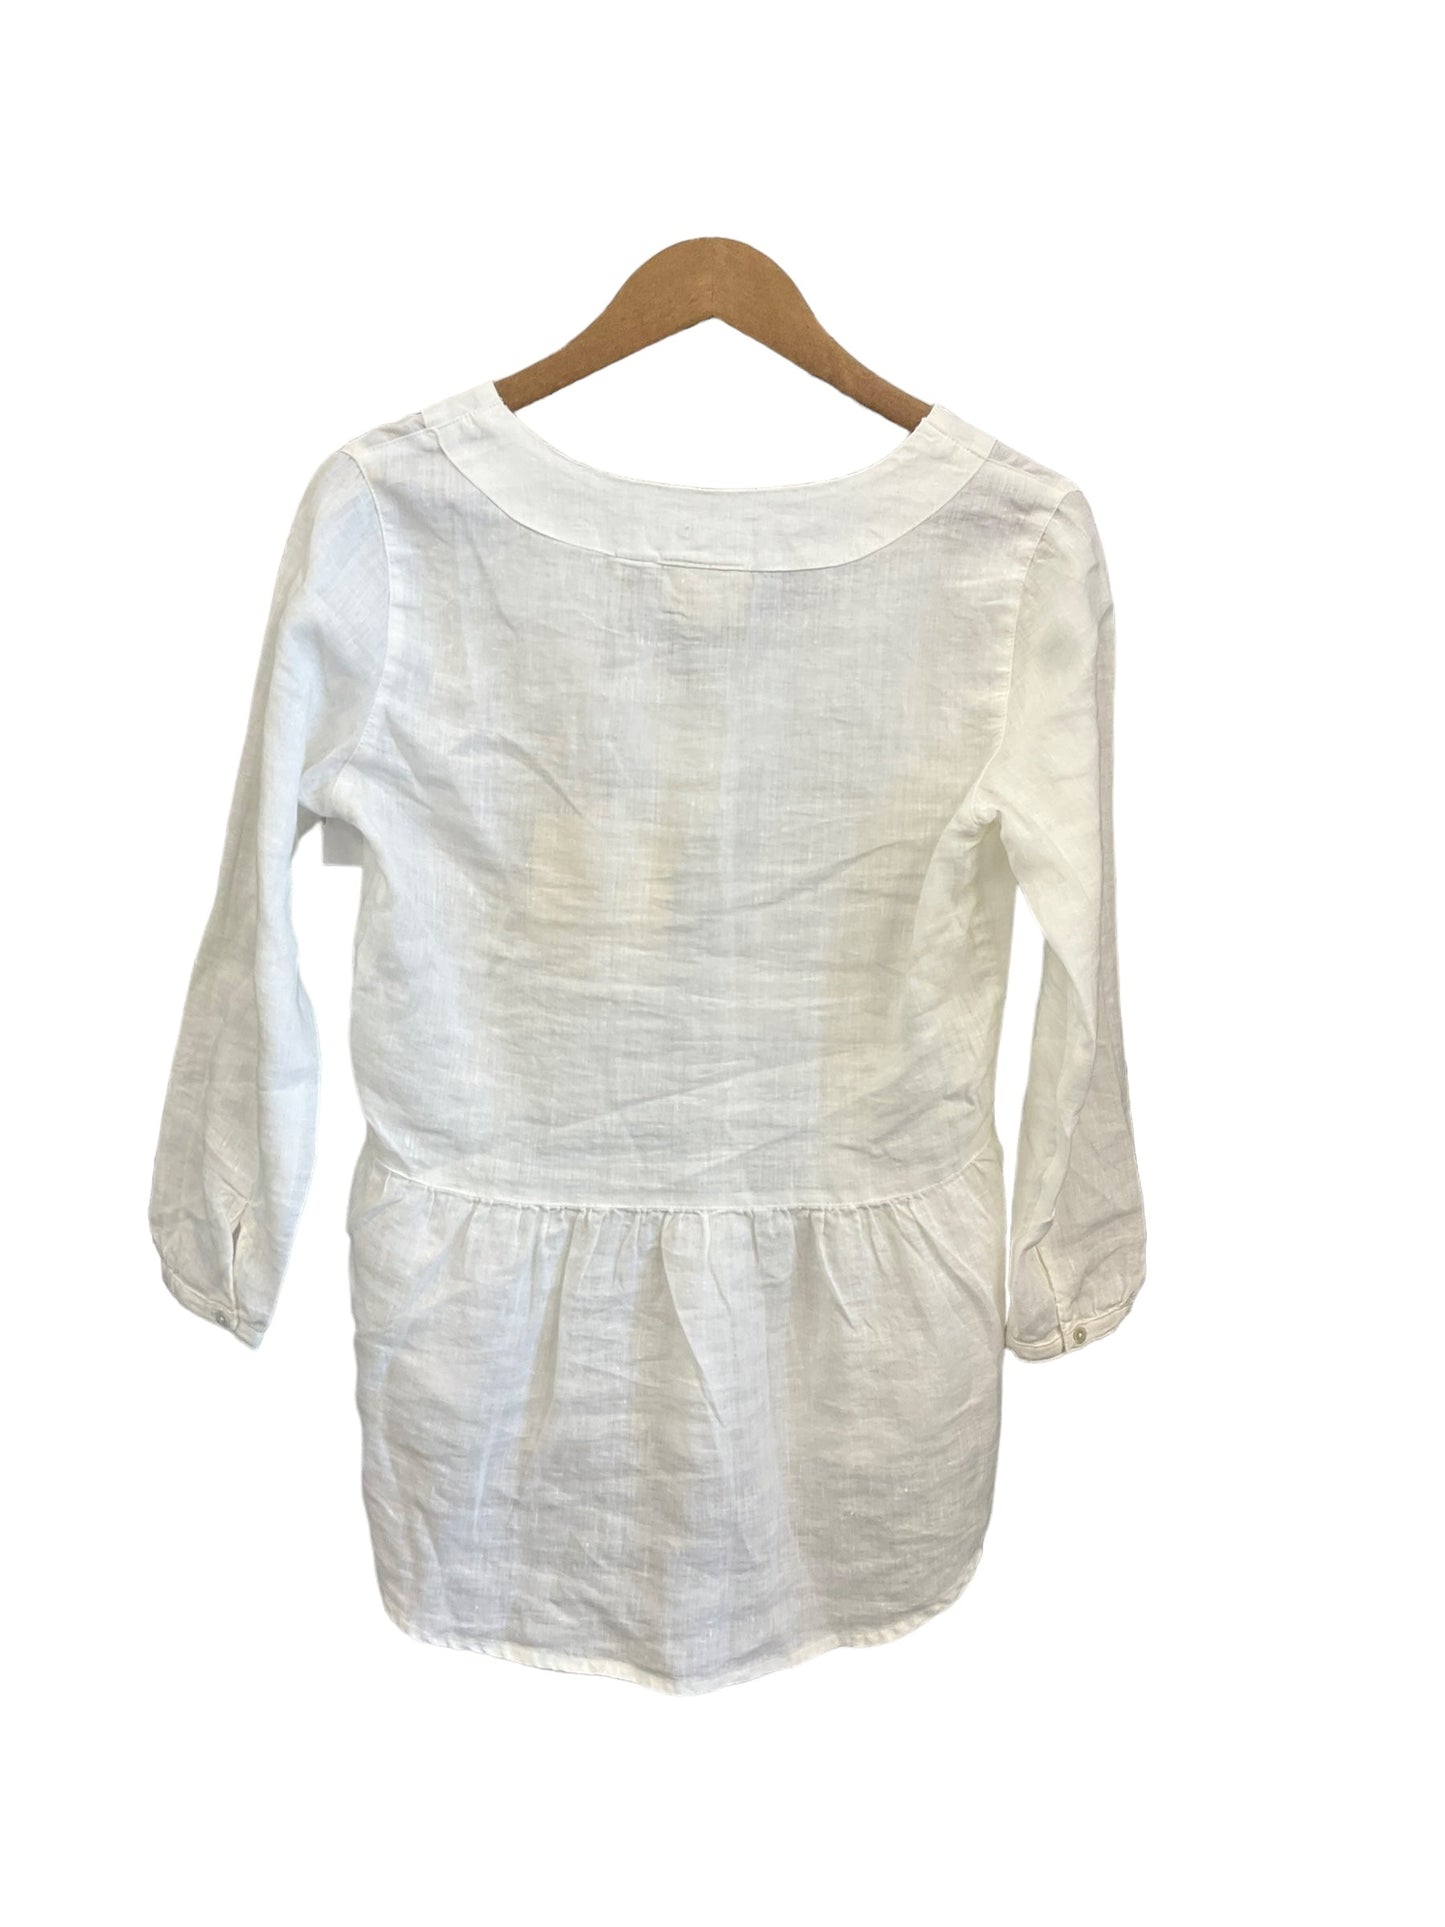 Top 3/4 Sleeve By Cynthia Rowley  Size: Xs